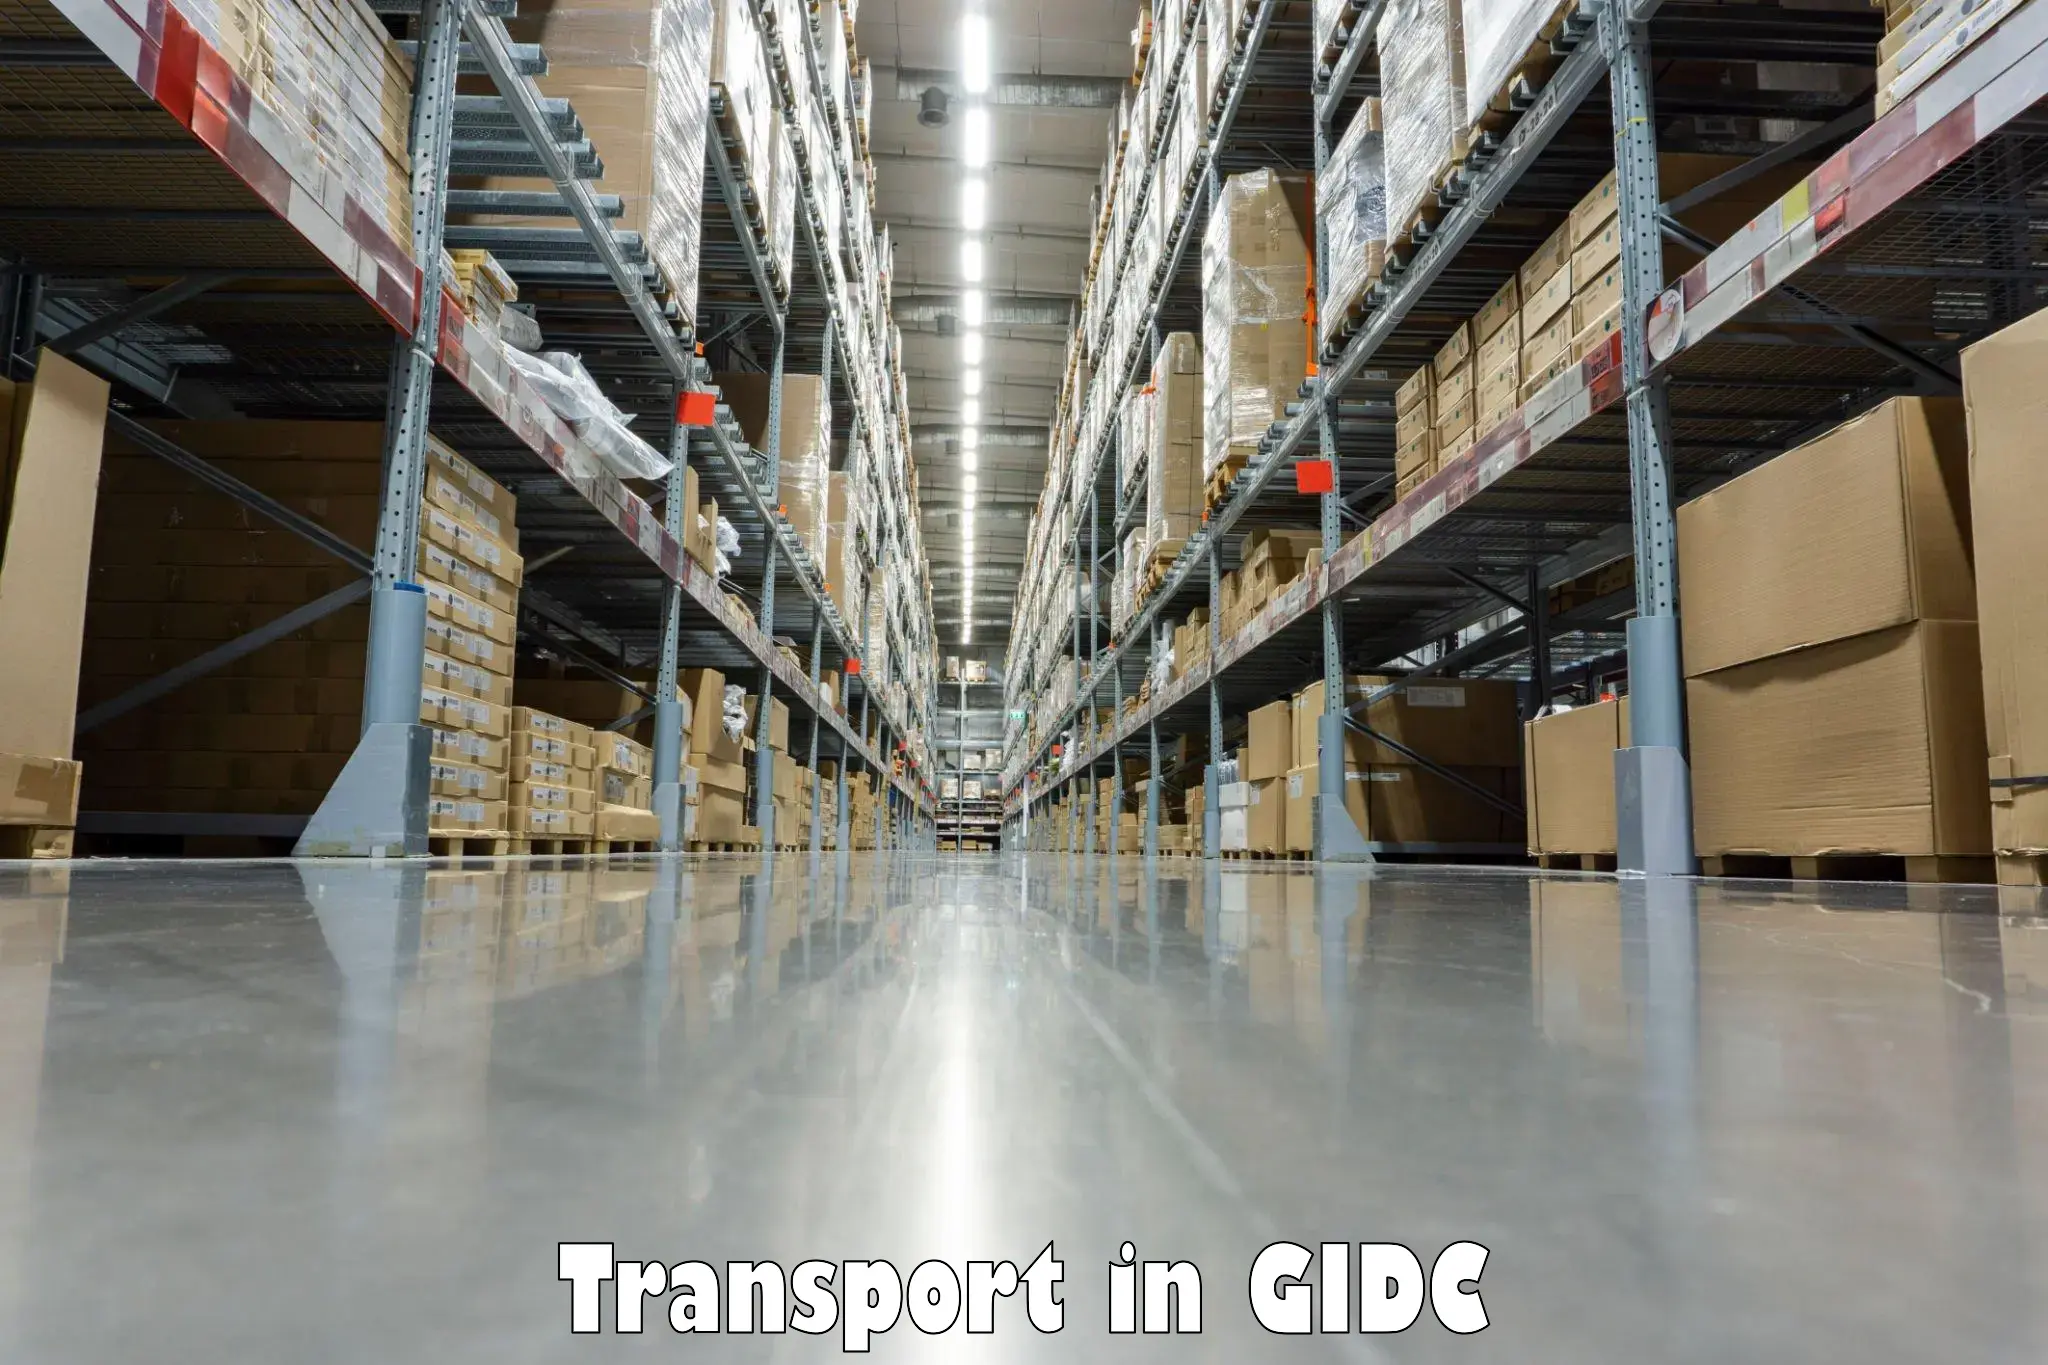 Container transport service in GIDC